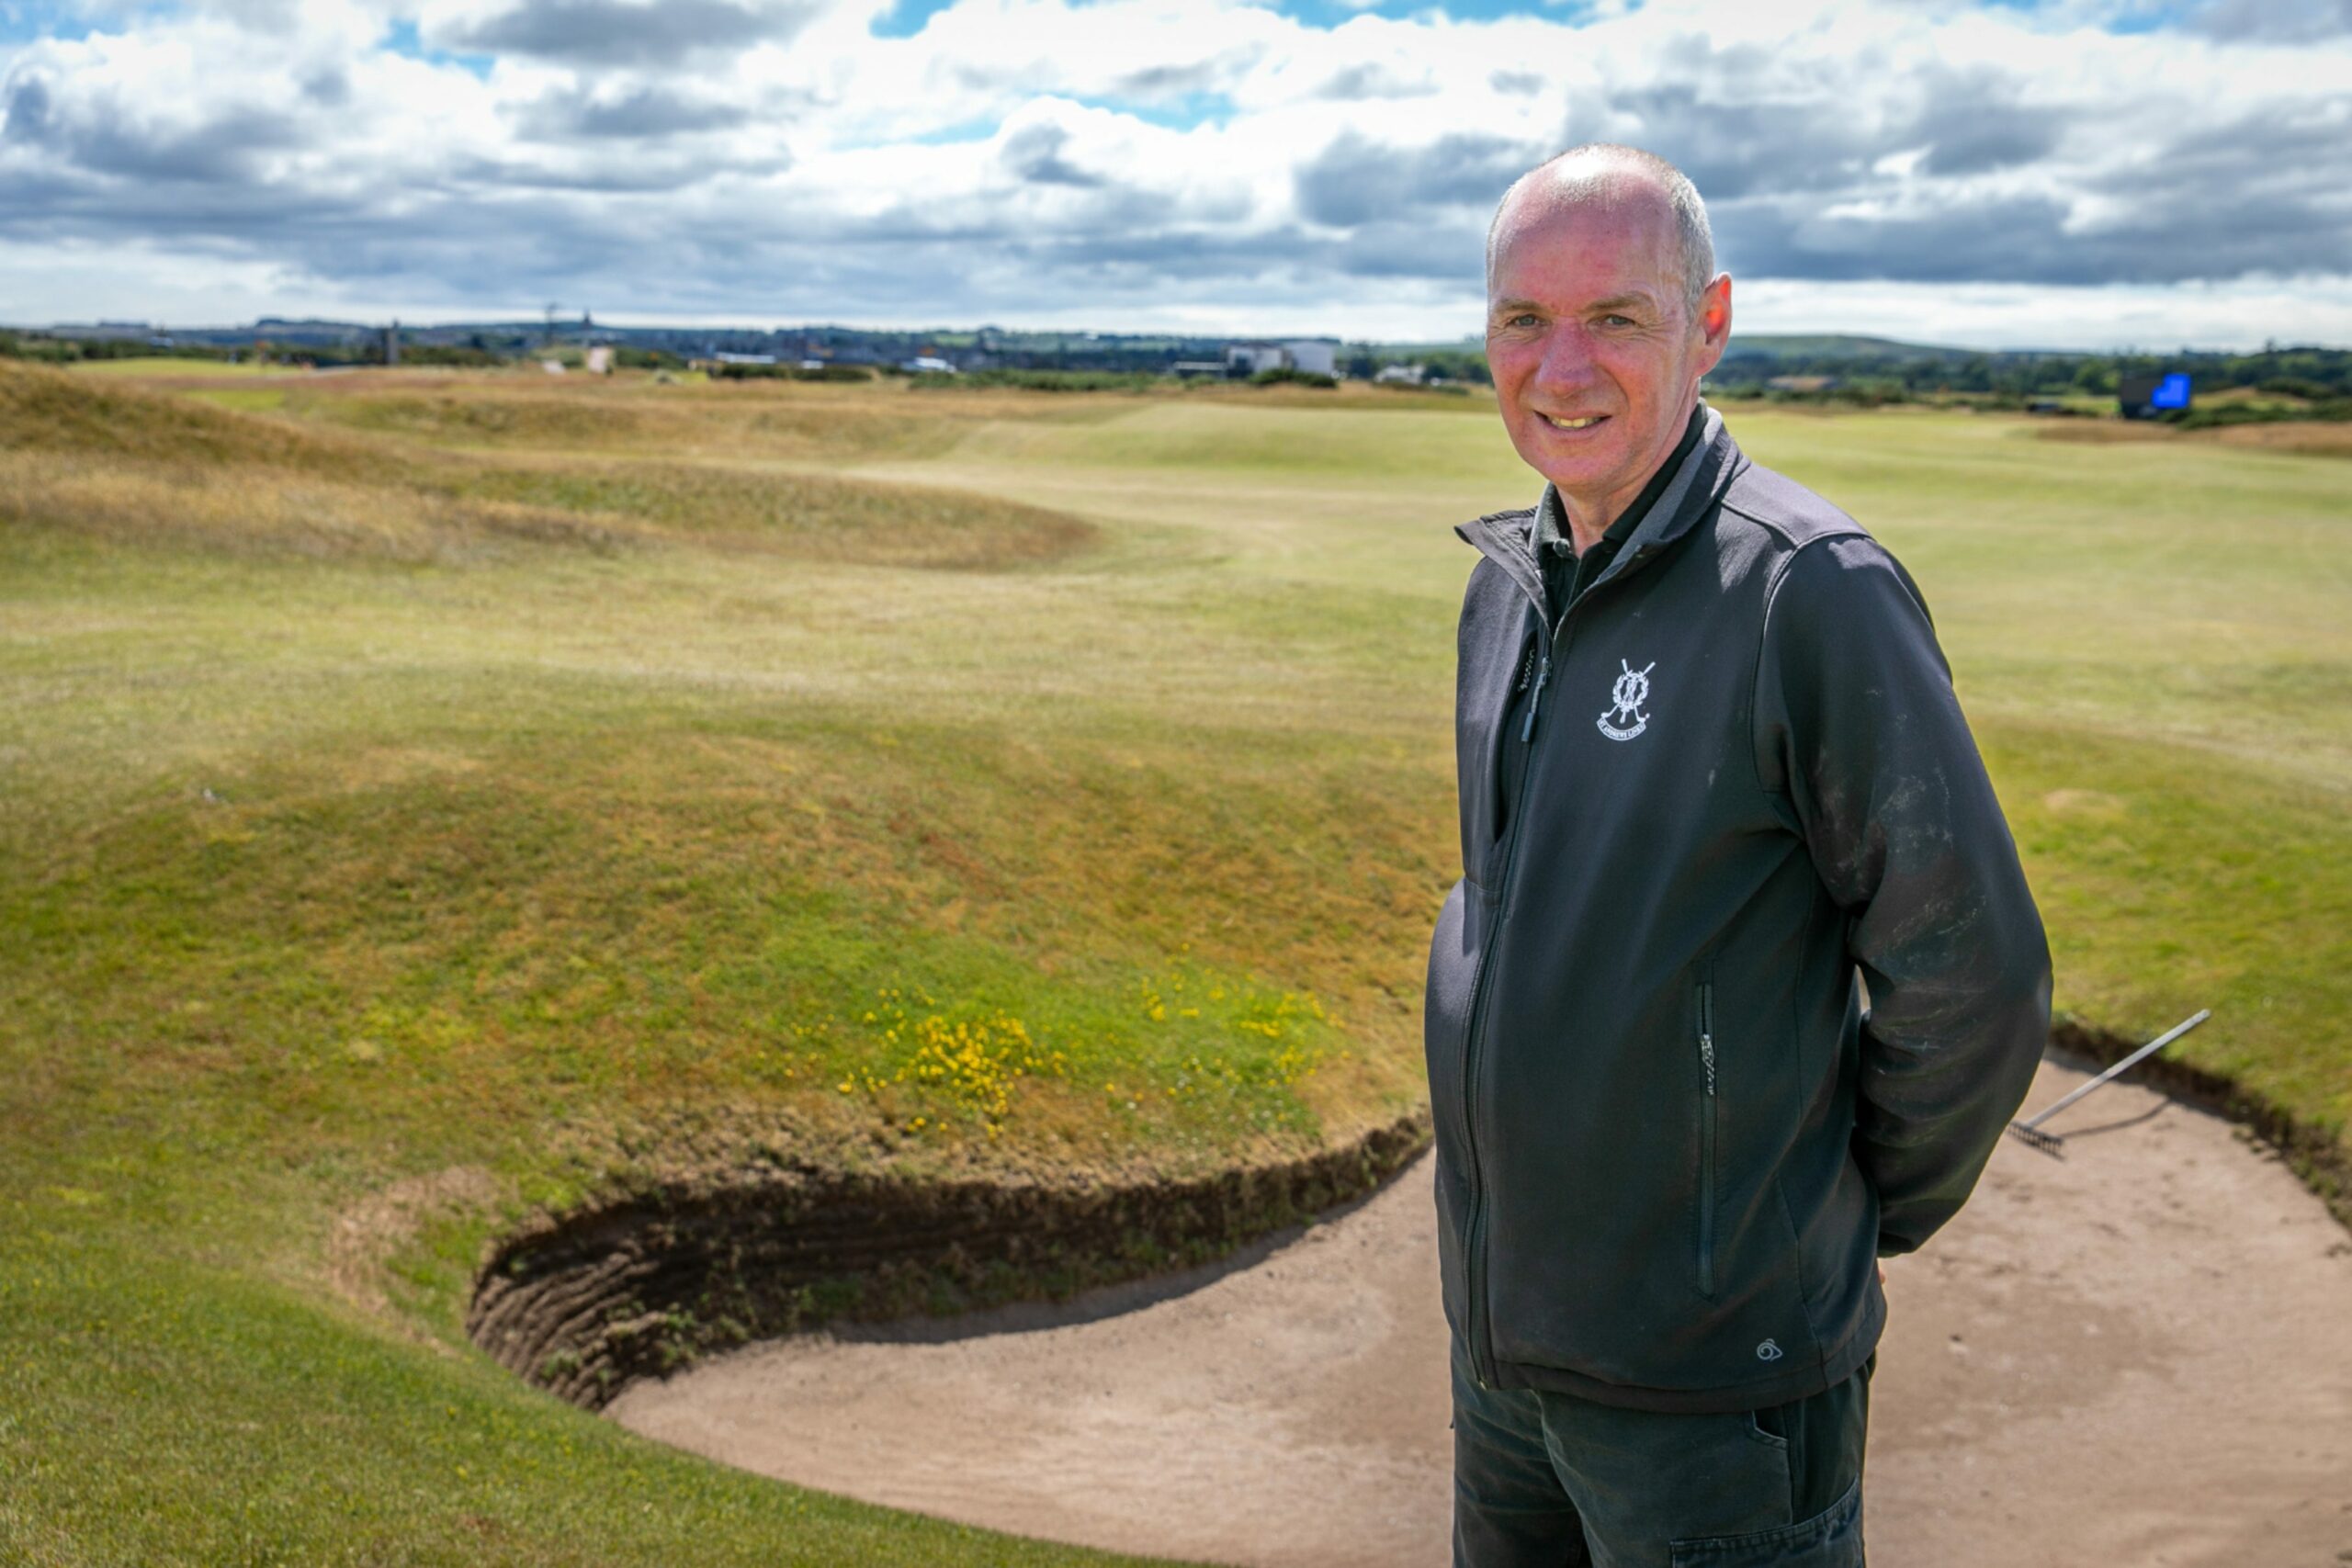 Greenkeeper William Nicol is working at his 8th Open championship at St Andrews.